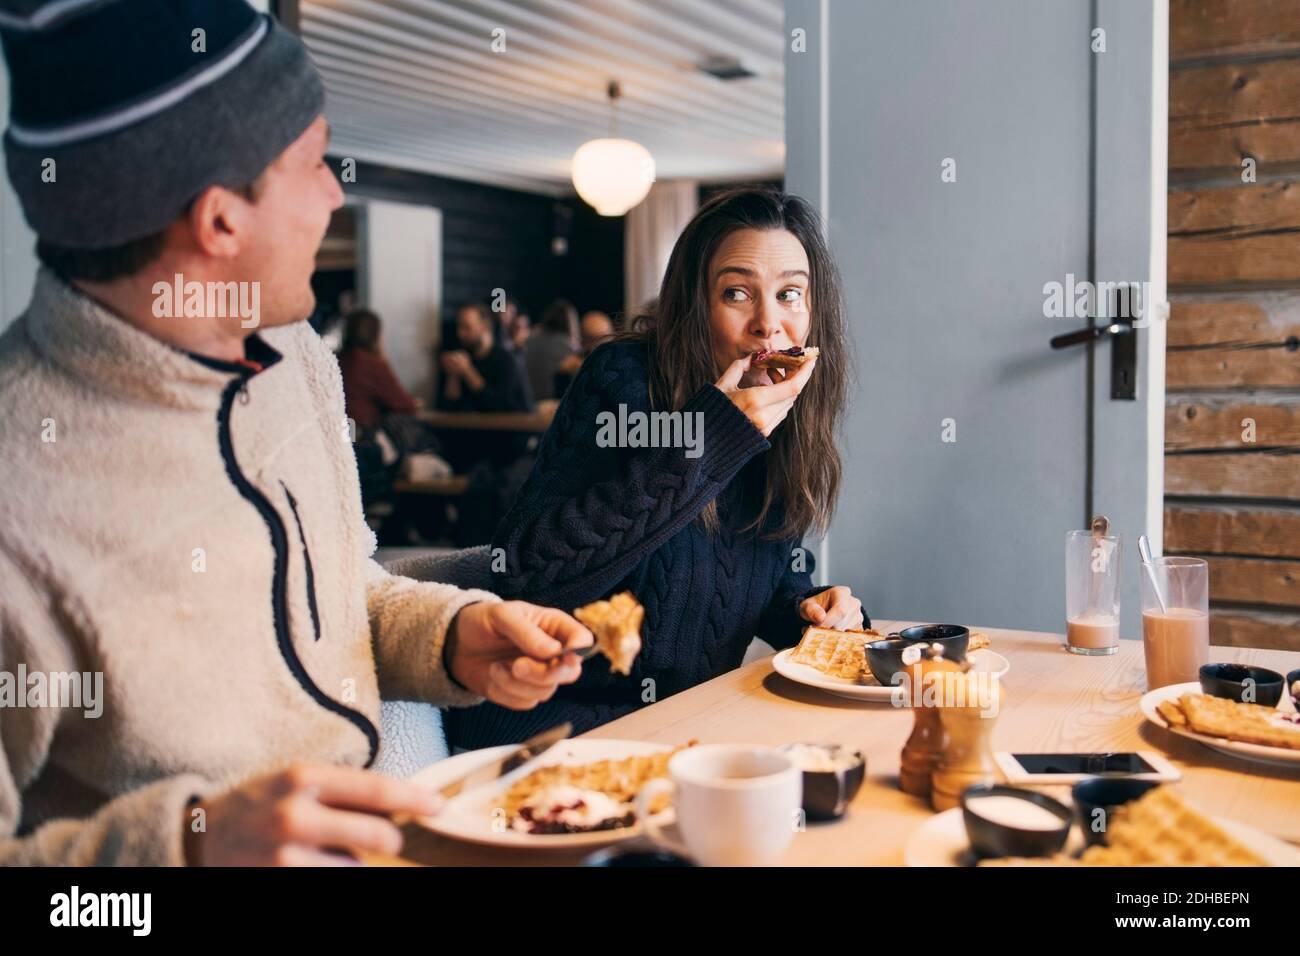 Woman eating breakfast while sitting with friend at table in log cabin Stock Photo